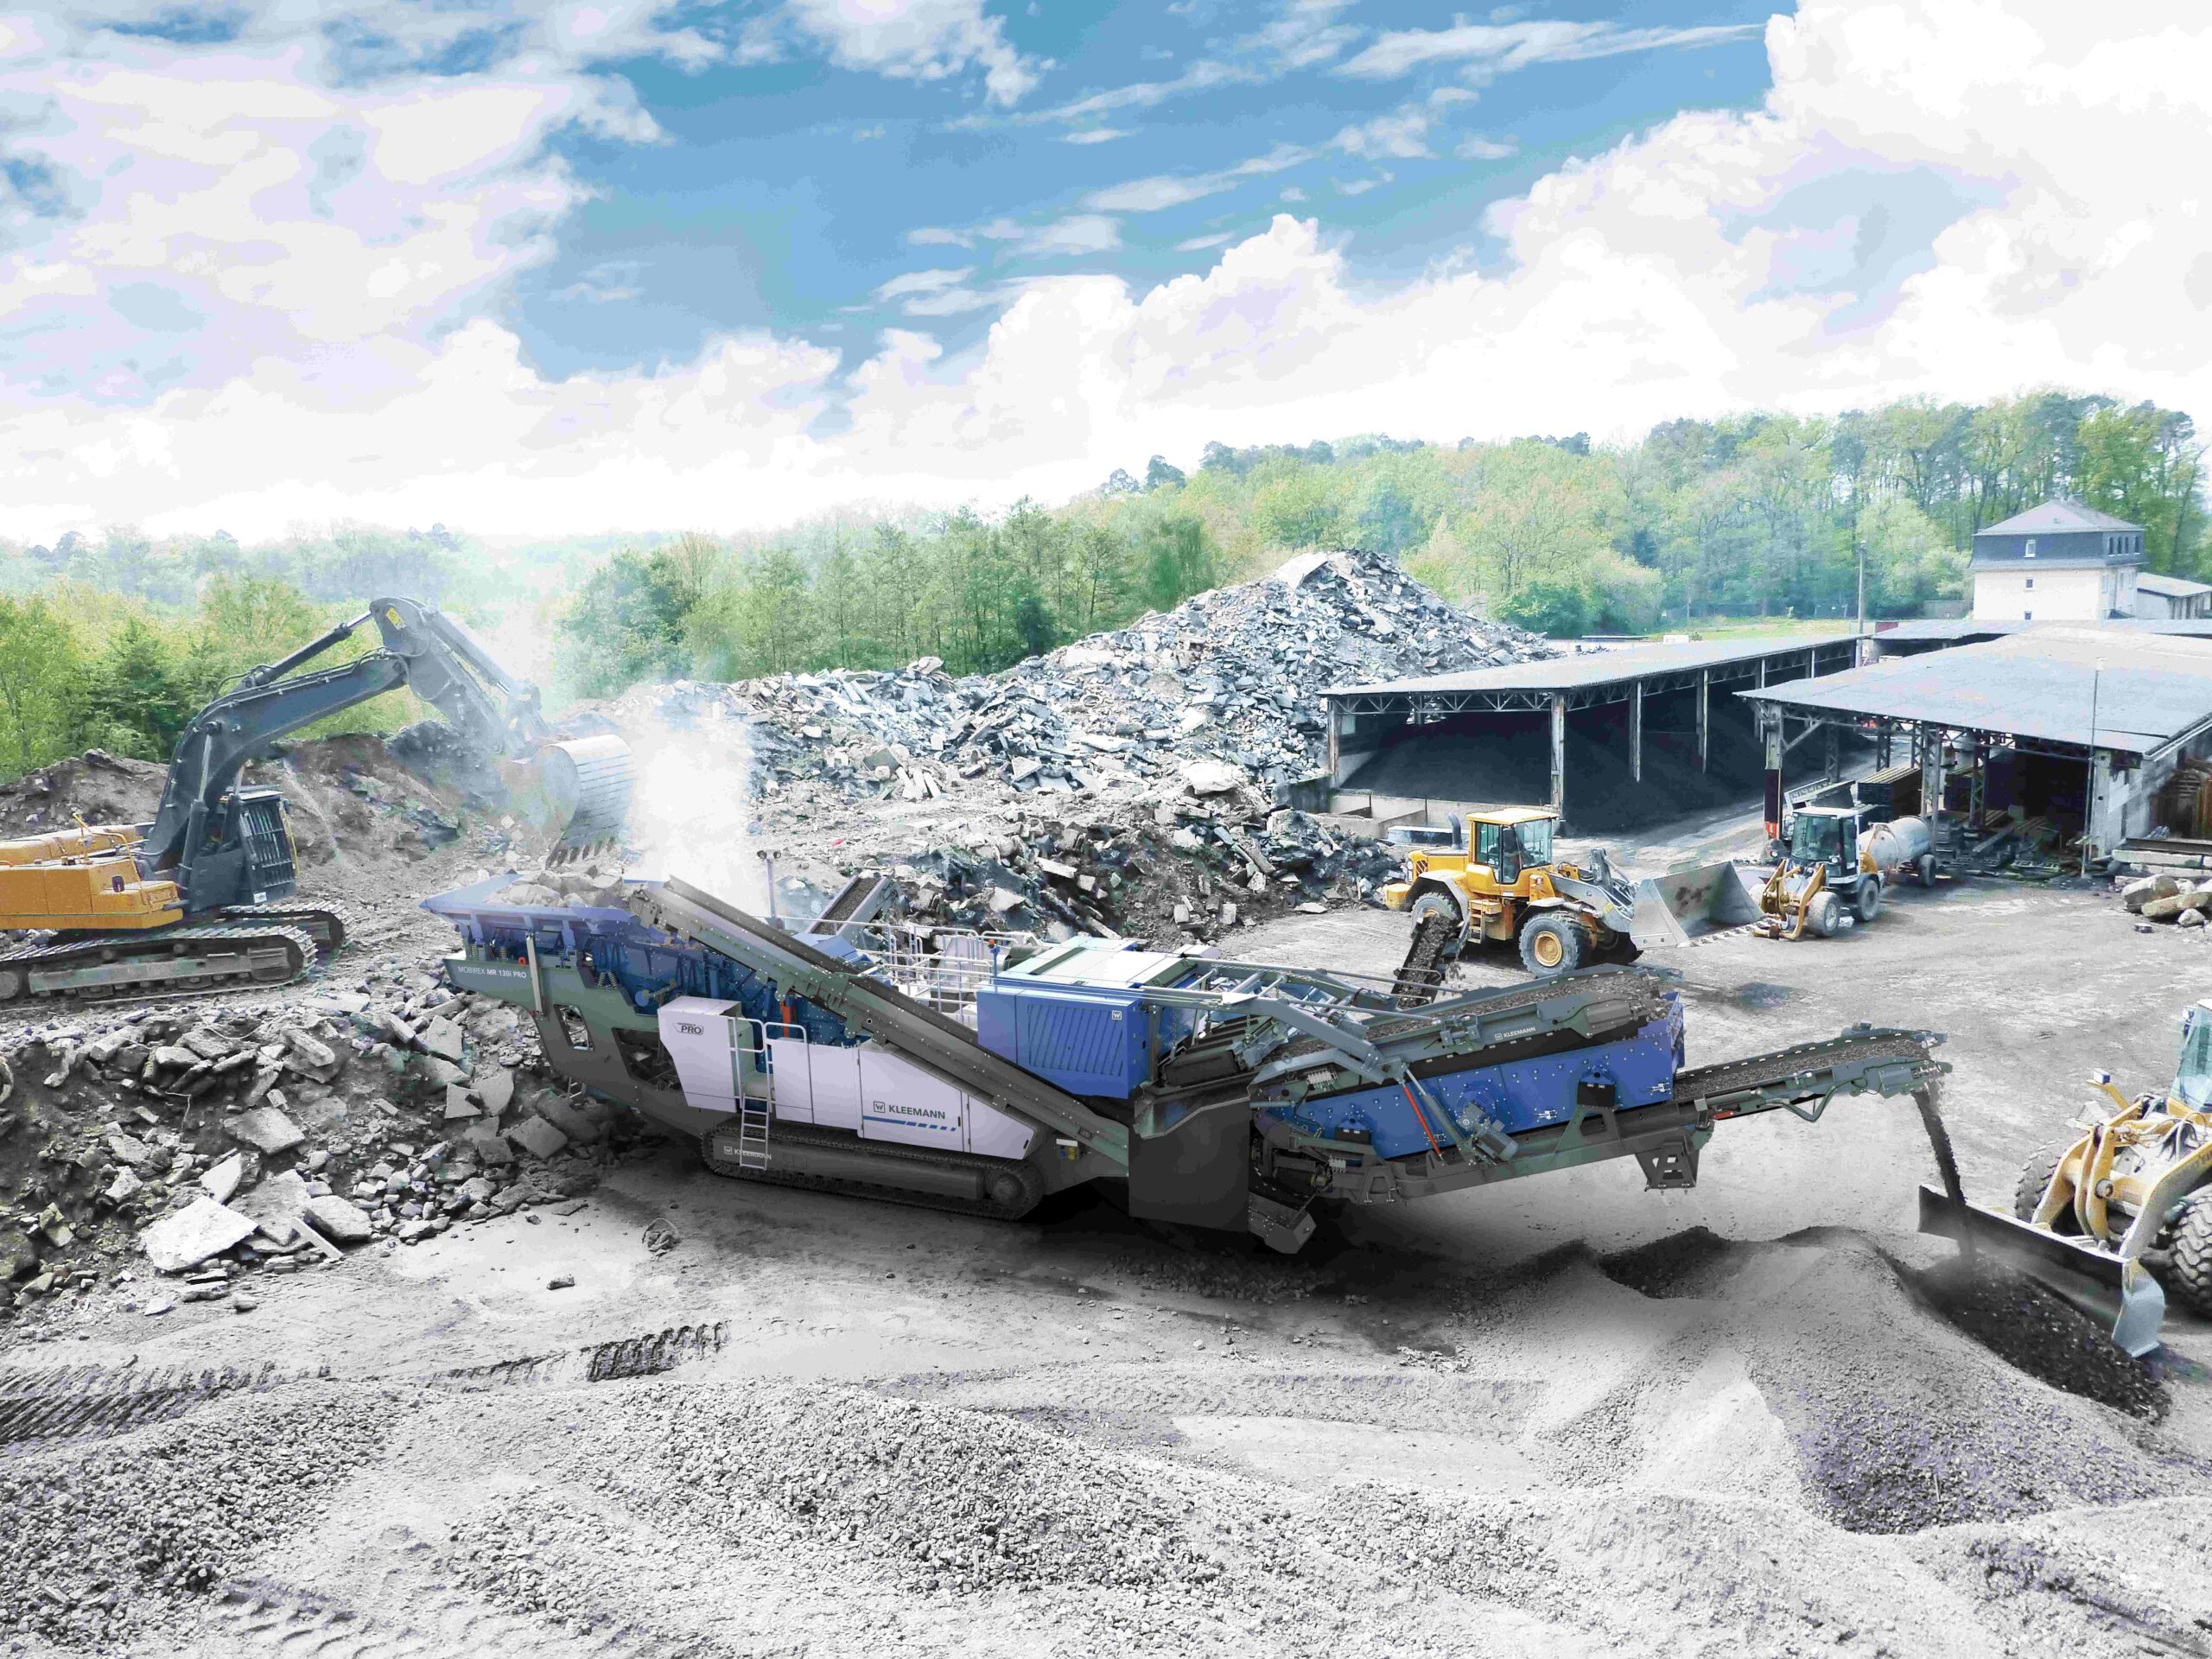 In stationary recycling operations, the preconditions for the use of a Kleemann crushing plant with E-DRIVE are often very favourable.